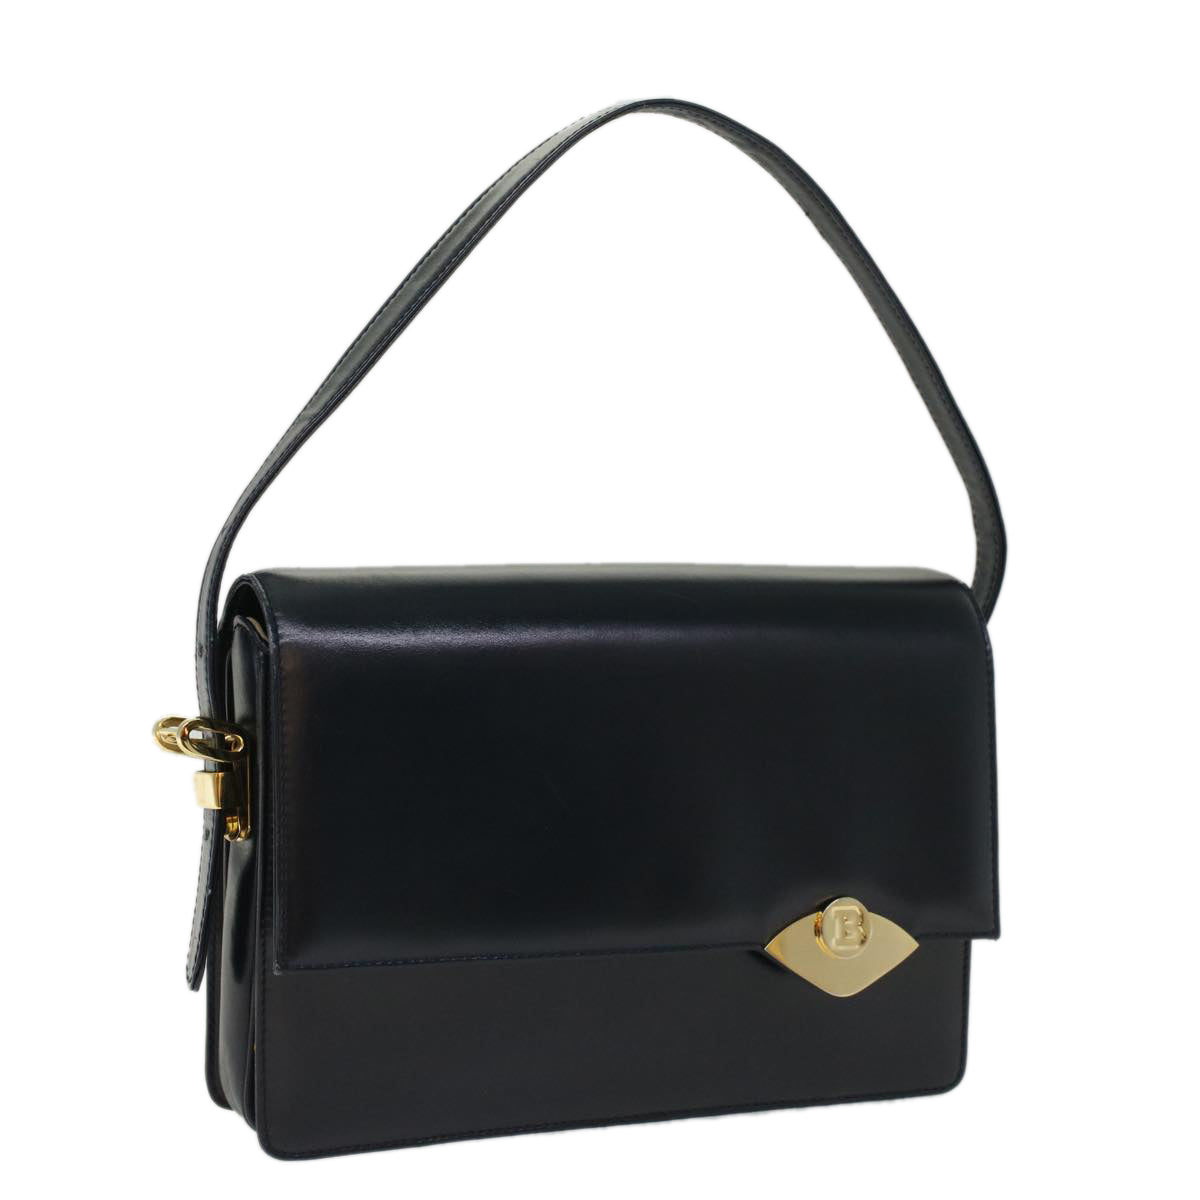 BALLY Shoulder Bag Leather Navy Auth bs7623